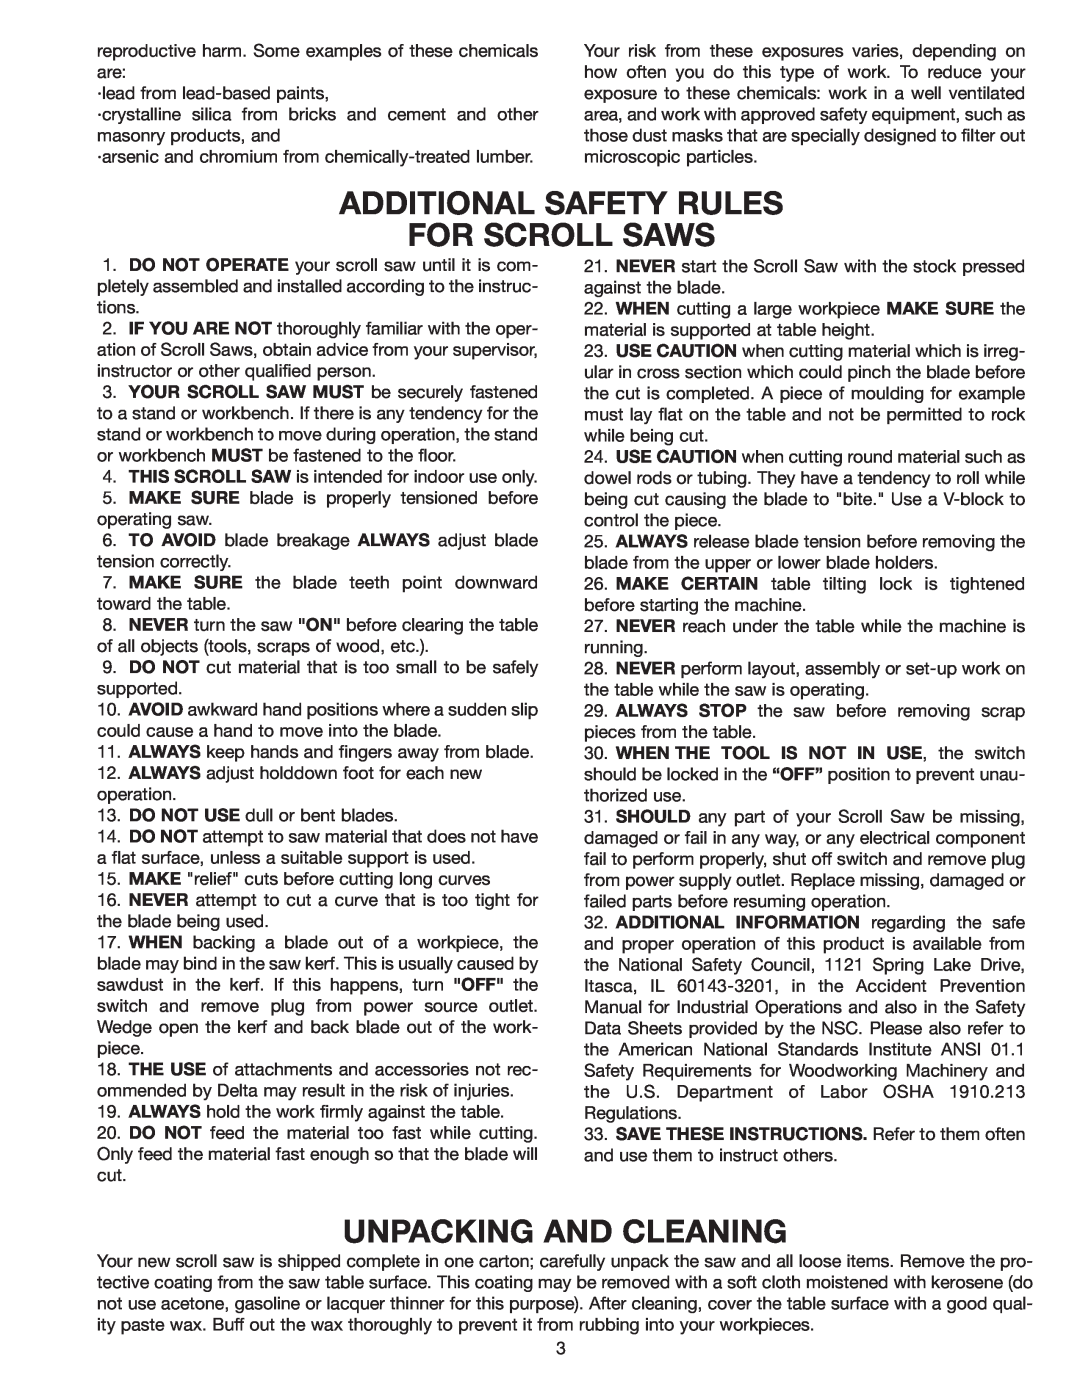 Delta 40-540 warranty Additional Safety Rules For Scroll Saws, Unpacking And Cleaning 